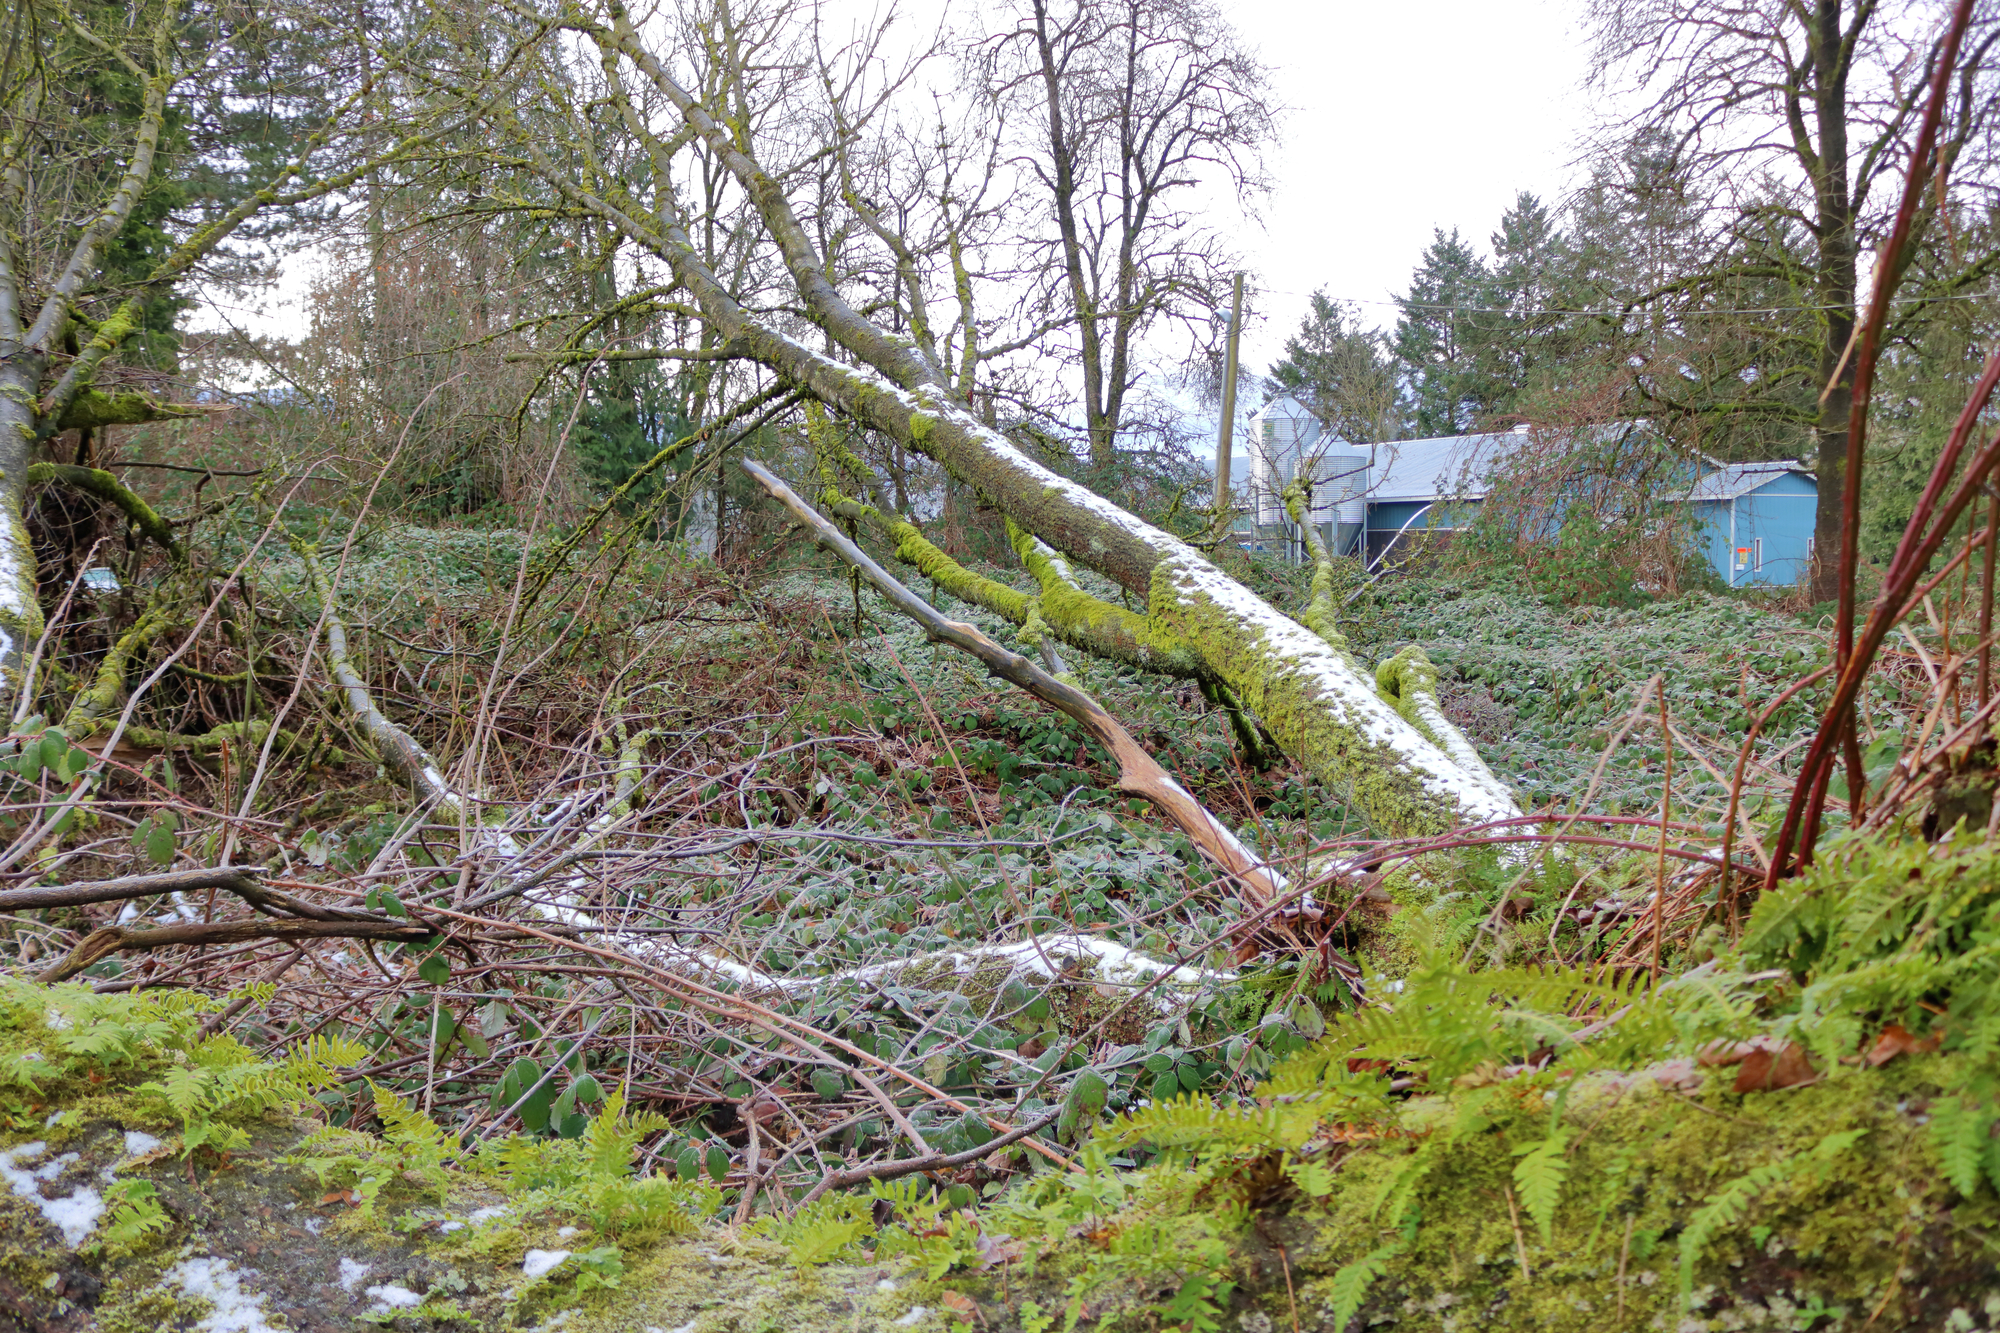 Prodan LLC provides Tigard land clearing services